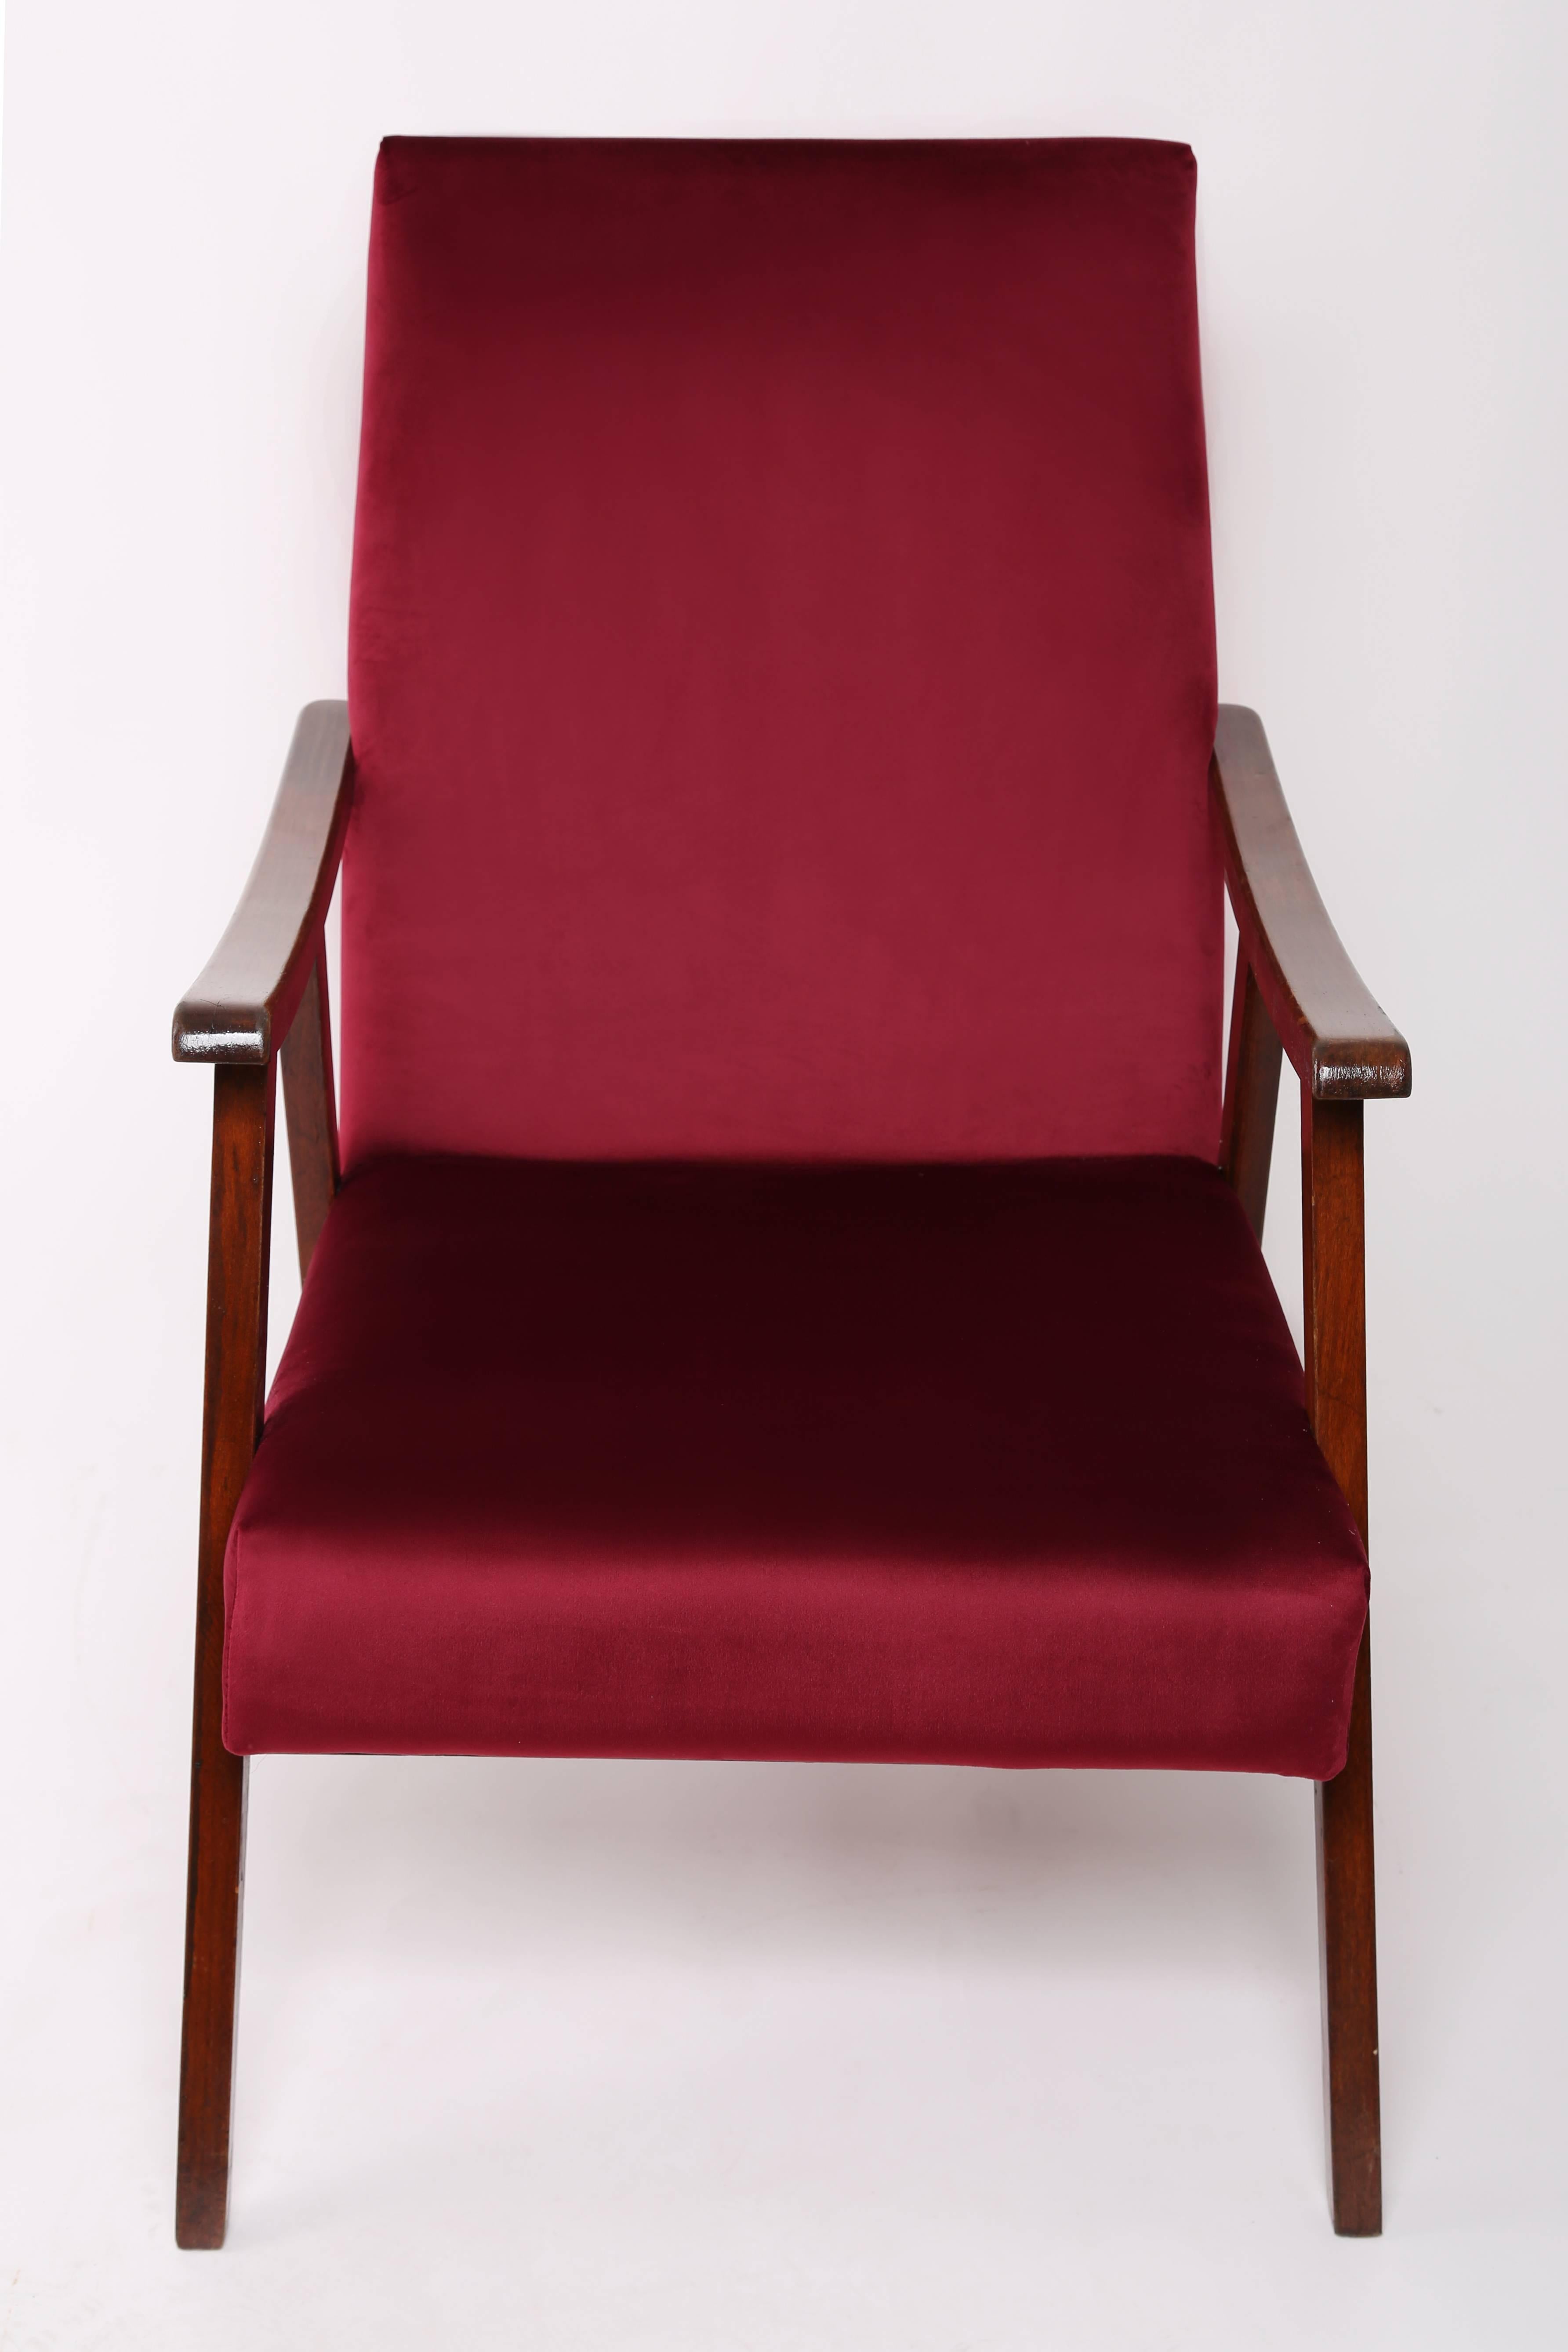 The armchair produced in the times of the PRL, we estimate the 1960s. Furniture after a full carpentry and upholstery renovation. The seat and backrest are covered with high quality velor with a deep maroon color. The armchair will work as an accent